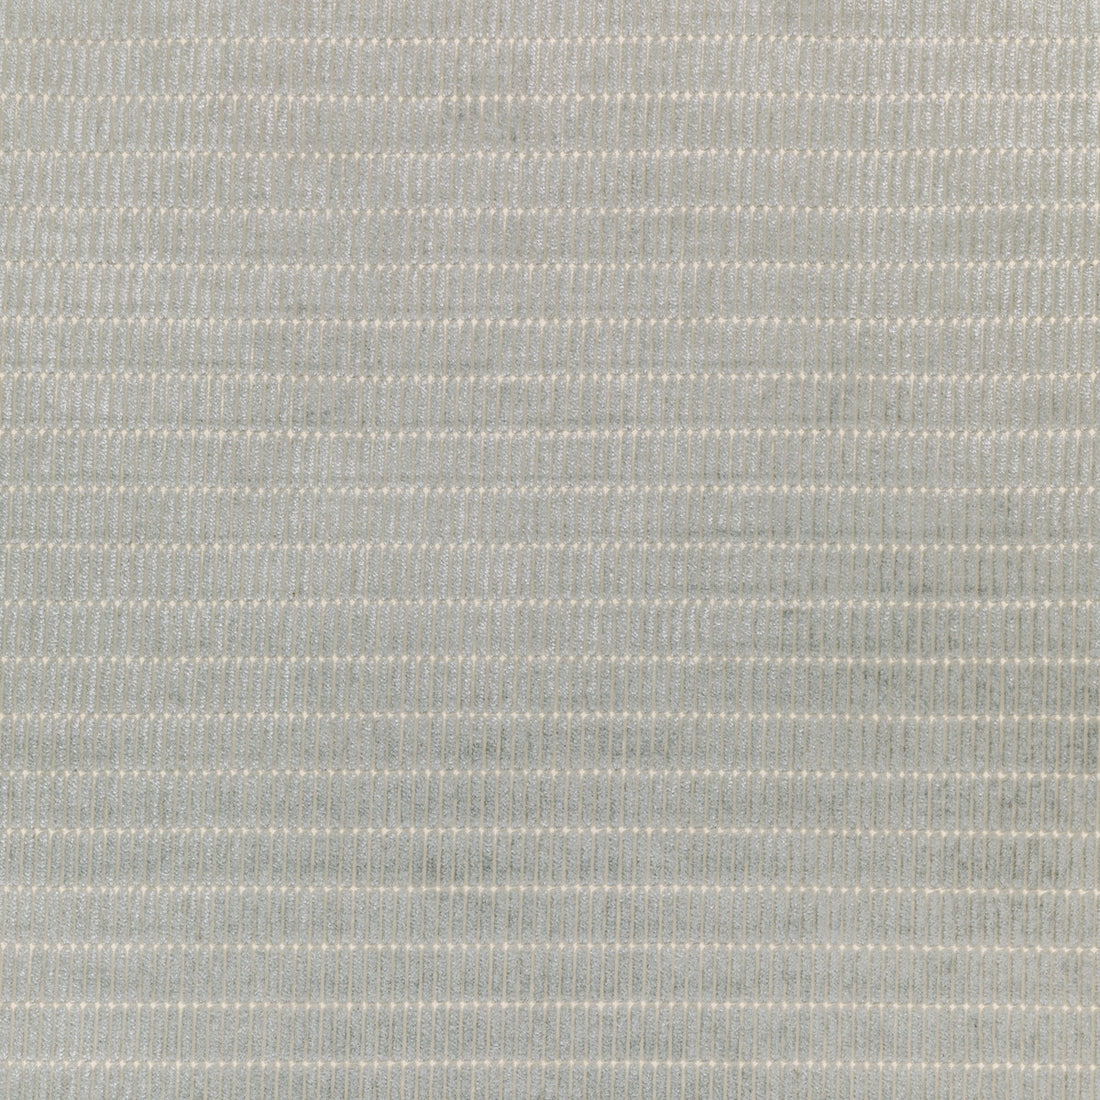 Boarding Pass fabric in pebble color - pattern 34106.11.0 - by Kravet Couture in the Modern Luxe III collection